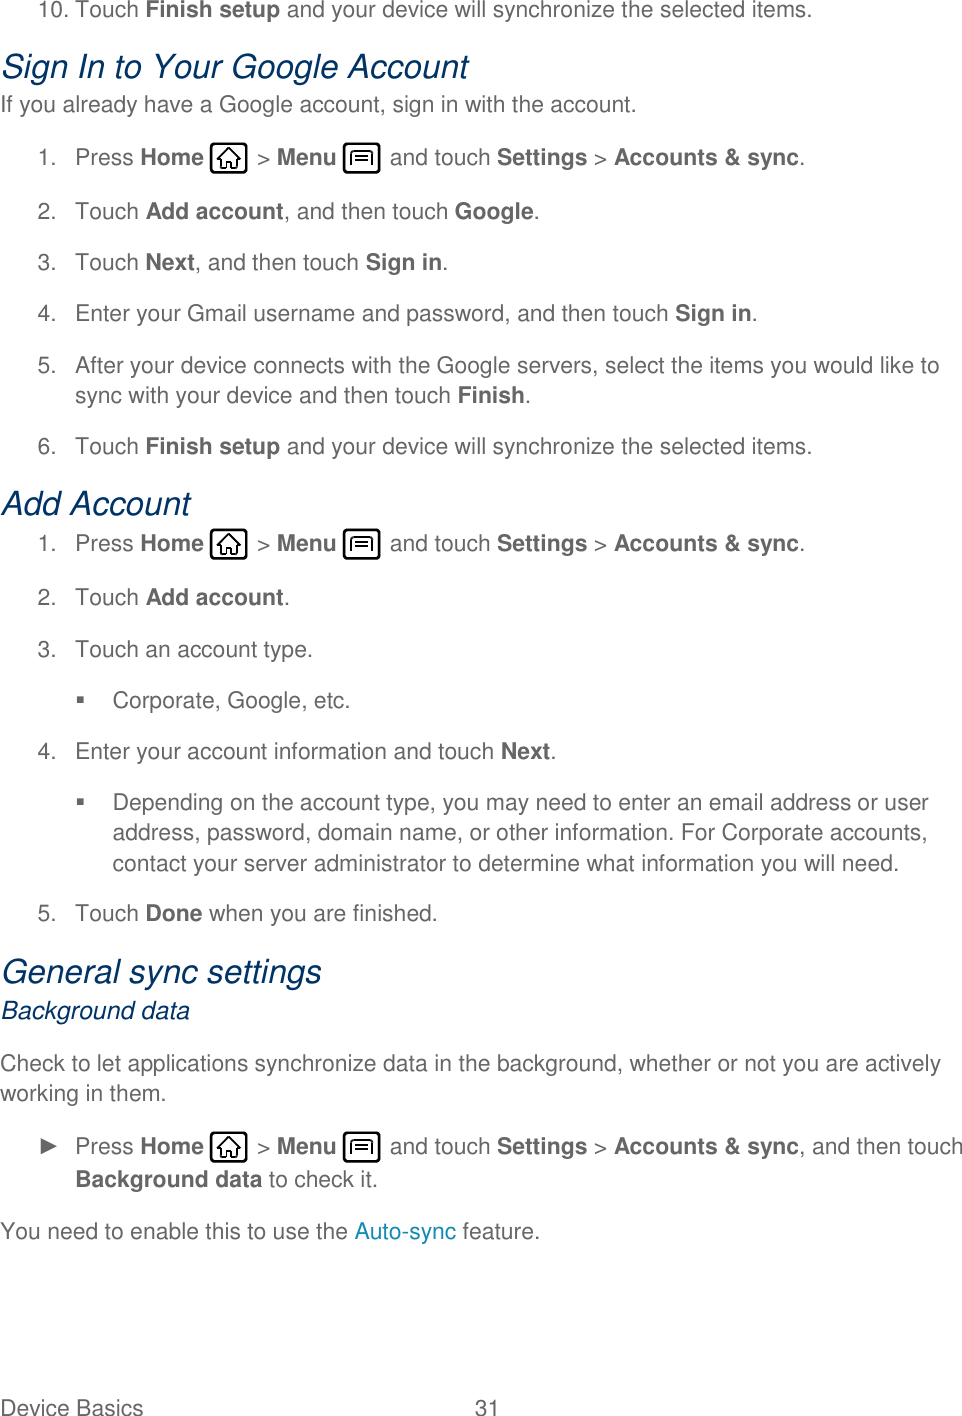 Device Basics  31   10. Touch Finish setup and your device will synchronize the selected items. Sign In to Your Google Account If you already have a Google account, sign in with the account. 1.  Press Home   &gt; Menu   and touch Settings &gt; Accounts &amp; sync. 2.  Touch Add account, and then touch Google.  3.  Touch Next, and then touch Sign in. 4.  Enter your Gmail username and password, and then touch Sign in. 5.  After your device connects with the Google servers, select the items you would like to sync with your device and then touch Finish.  6.  Touch Finish setup and your device will synchronize the selected items. Add Account 1.  Press Home   &gt; Menu   and touch Settings &gt; Accounts &amp; sync. 2.  Touch Add account. 3.  Touch an account type.   Corporate, Google, etc. 4.  Enter your account information and touch Next.   Depending on the account type, you may need to enter an email address or user address, password, domain name, or other information. For Corporate accounts, contact your server administrator to determine what information you will need. 5.  Touch Done when you are finished. General sync settings Background data Check to let applications synchronize data in the background, whether or not you are actively working in them. ►  Press Home   &gt; Menu   and touch Settings &gt; Accounts &amp; sync, and then touch Background data to check it. You need to enable this to use the Auto-sync feature. 